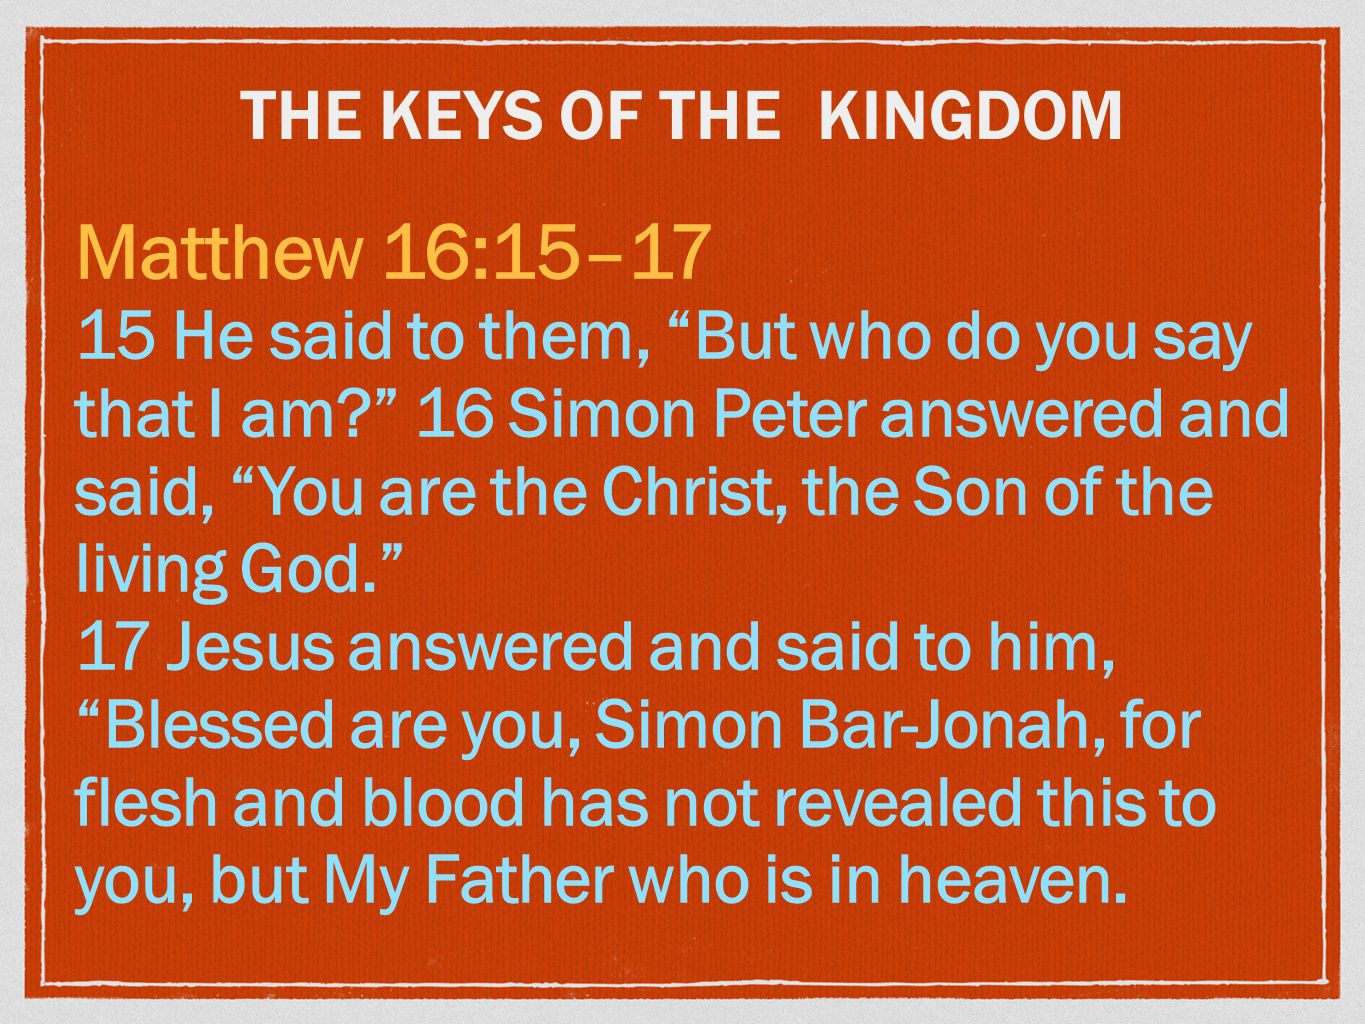 THE KEYS OF THE KINGDOM Matthew 16:15–17 15 He said to them, But who do you say that I am 16 Simon Peter answered and said, You are the Christ, the Son of the living God. 17 Jesus answered and said to him, Blessed are you, Simon Bar-Jonah, for flesh and blood has not revealed this to you, but My Father who is in heaven.